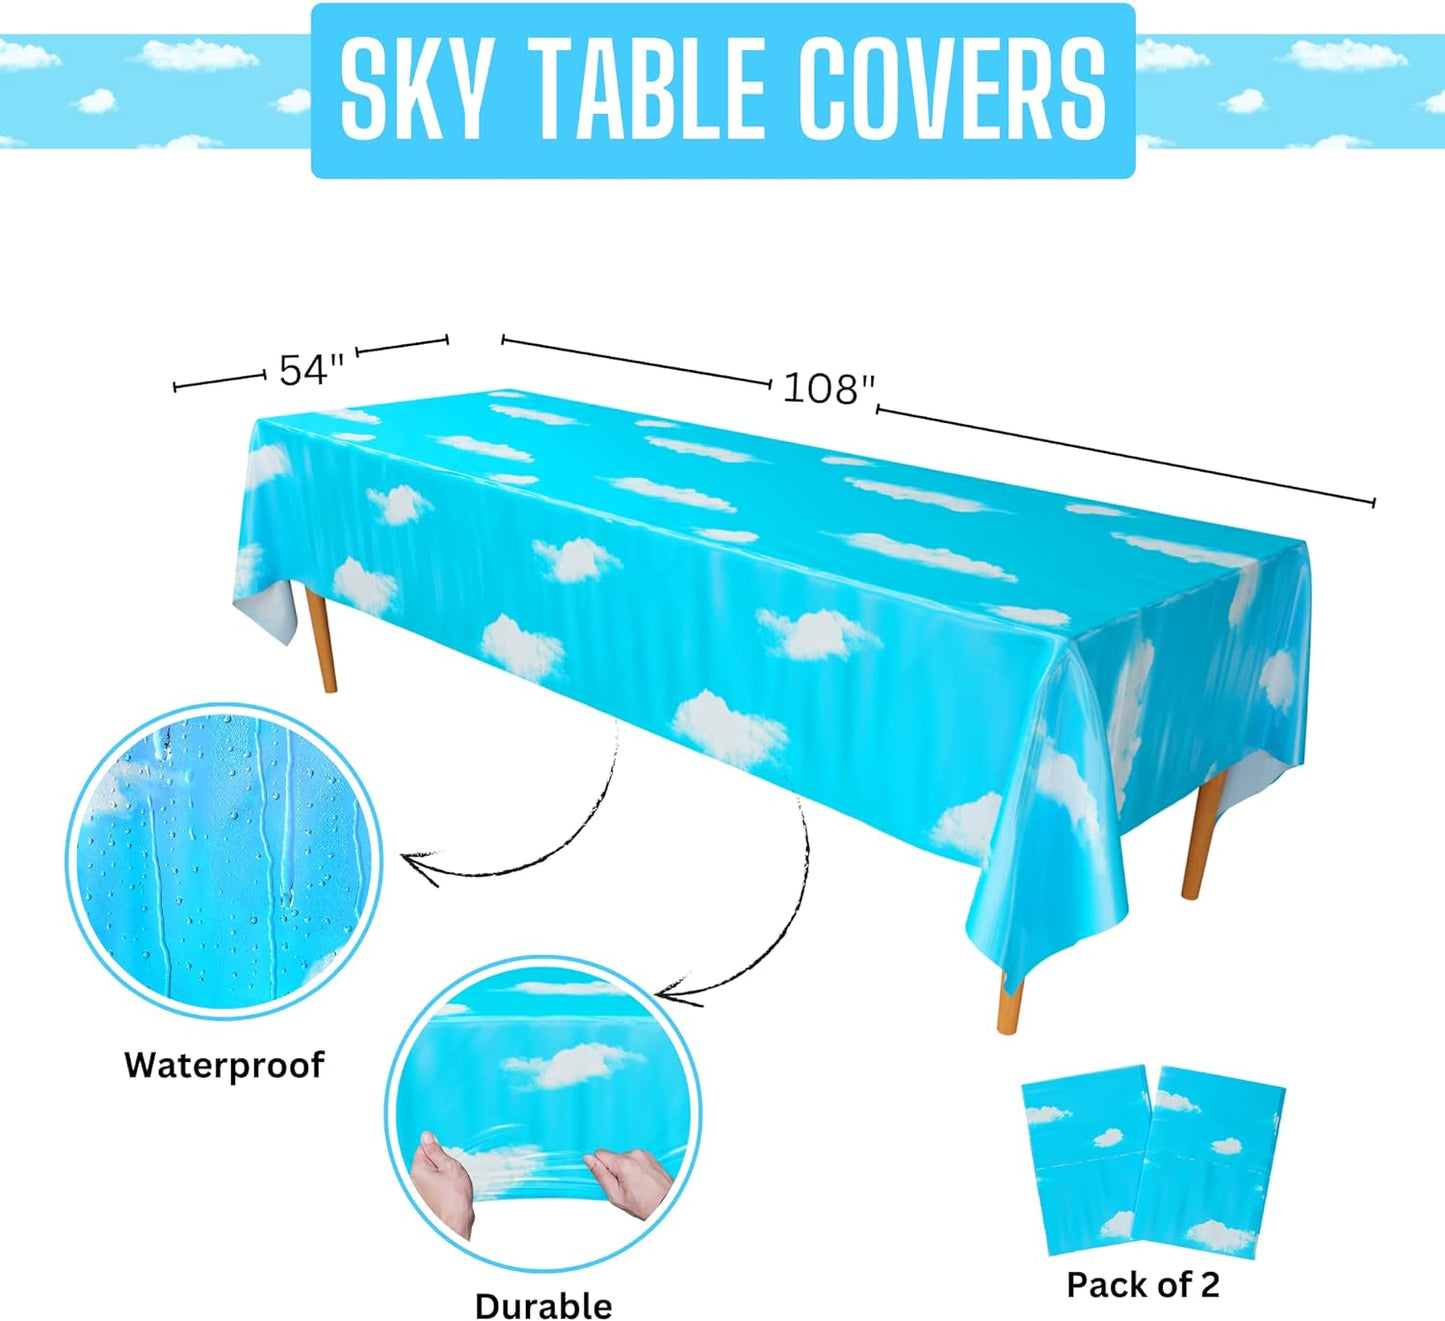 Sky Tablecovers - 54in x 108in (2 Pack)